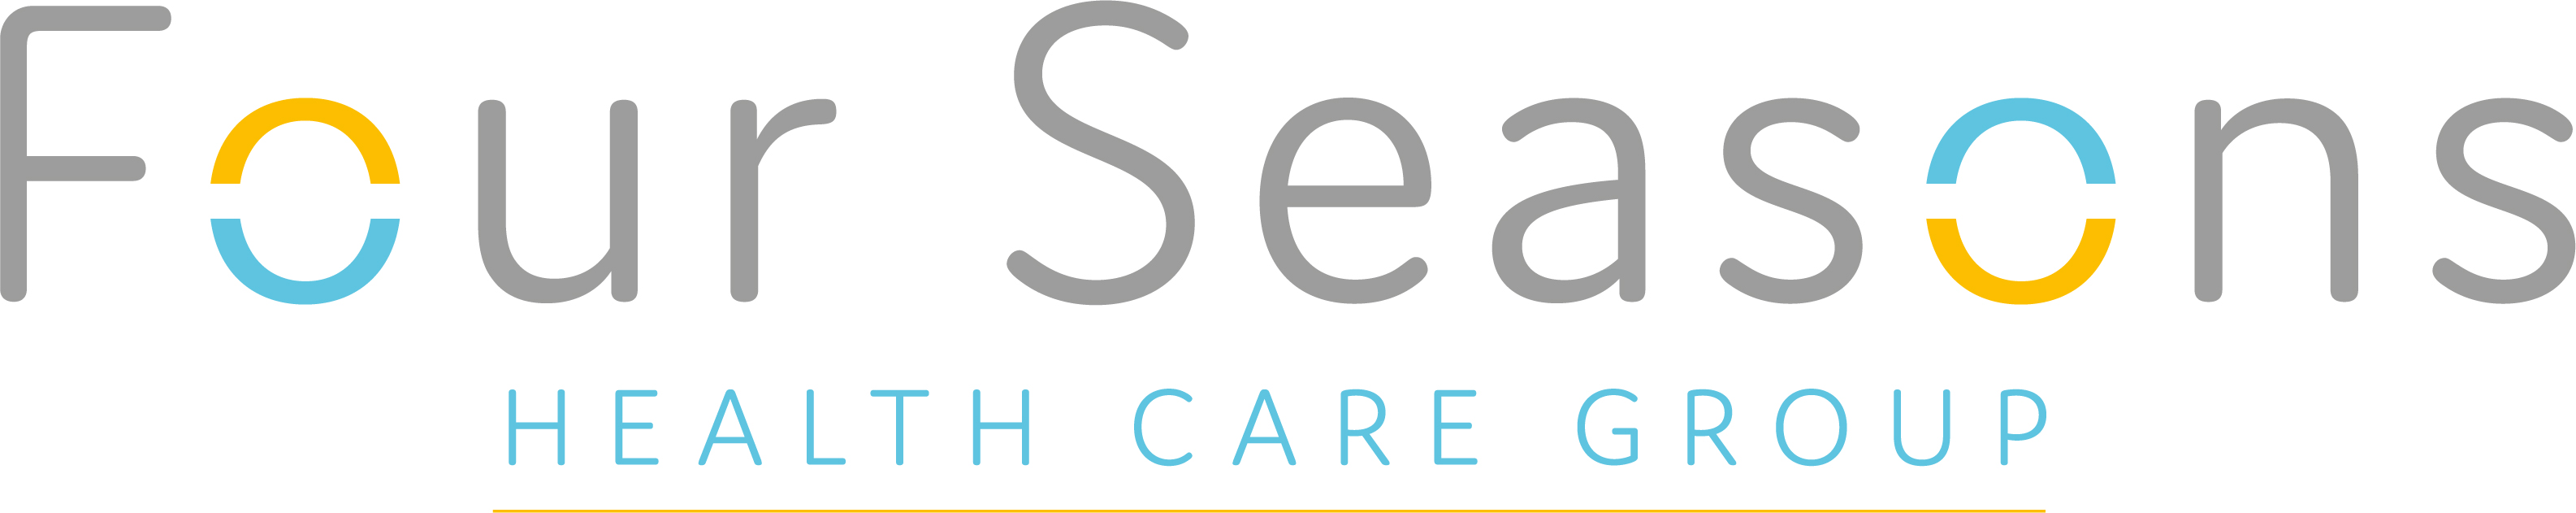 Four Seasons are exhibiting at Nursing Careers and Jobs Fair